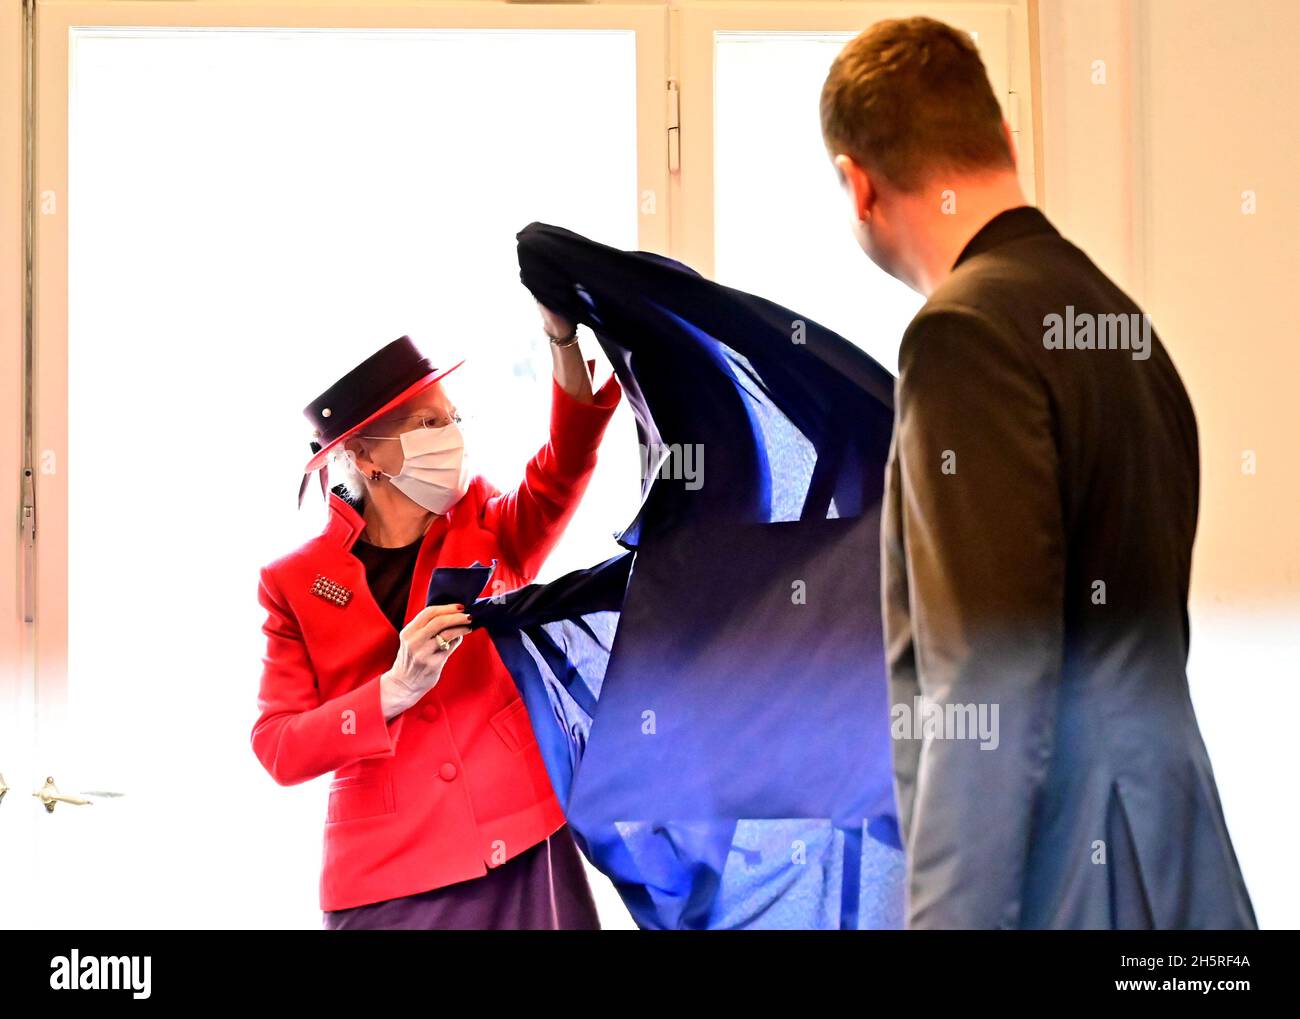 Denmark's Queen Margrethe and Berlin's Senator for Culture Klaus Lederer  unveil a memorial plate for Danish author Herman Bang durig her visit to  the Literaturhaus (Literature house) in Berlin, Germany November 11,